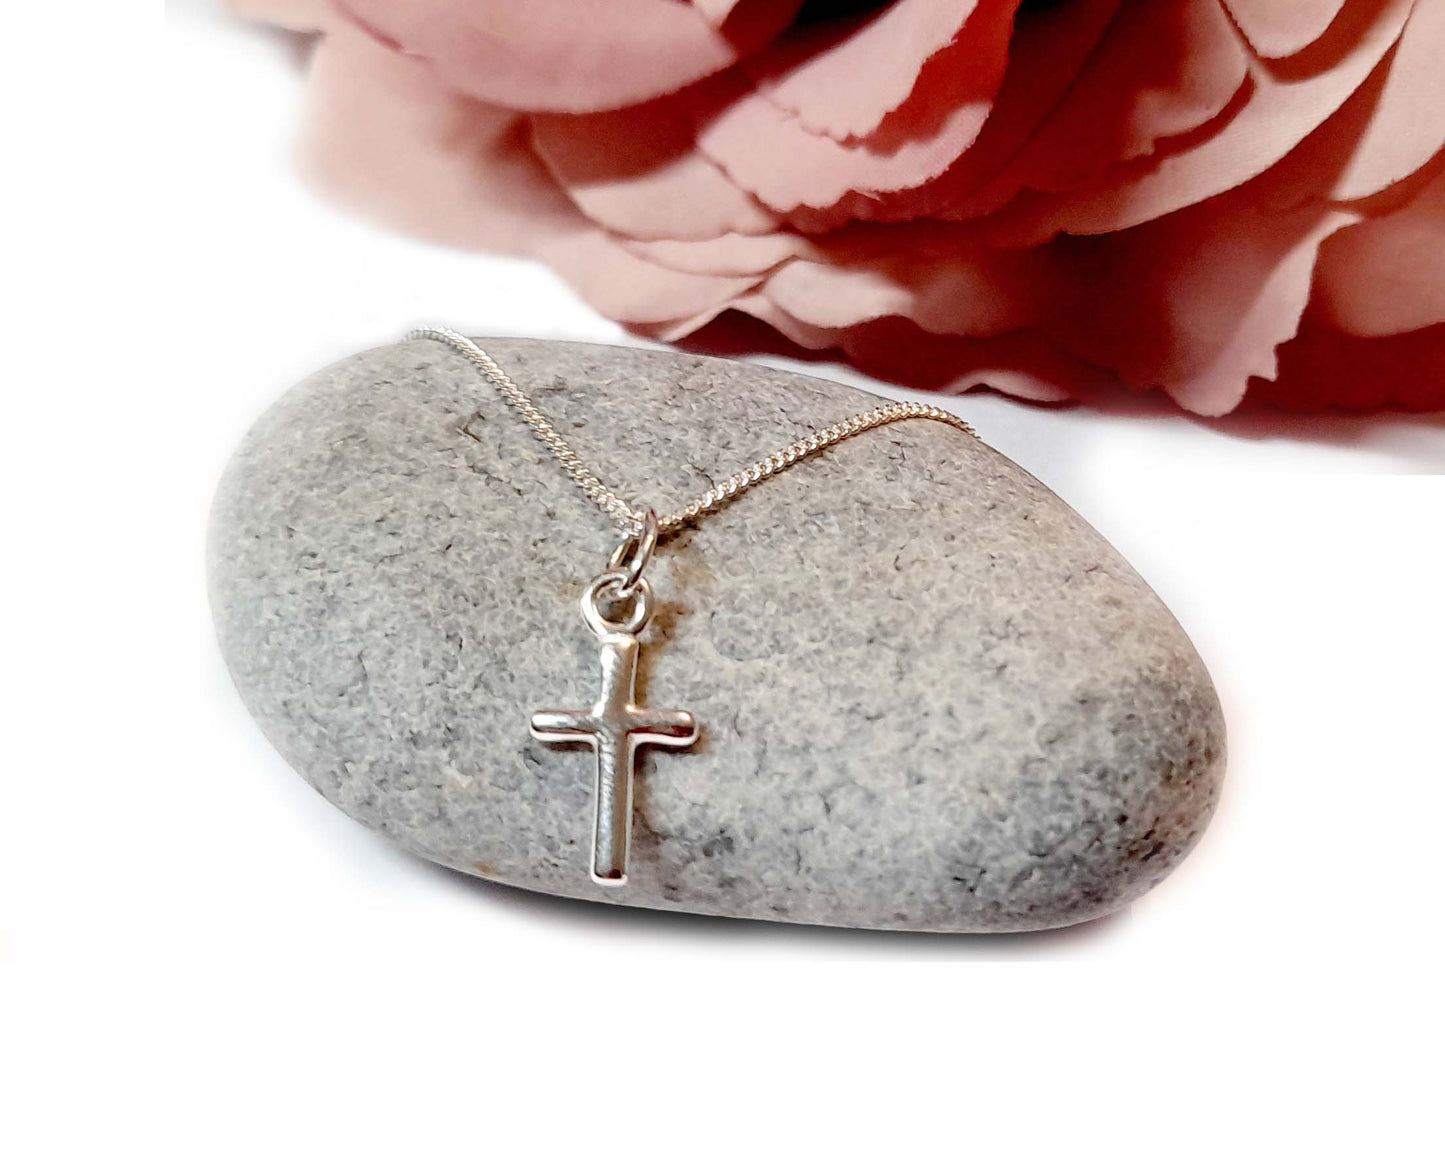 First Holy Communion Cross Necklace in Sterling Silver 925, Personalised Keepsake Gift